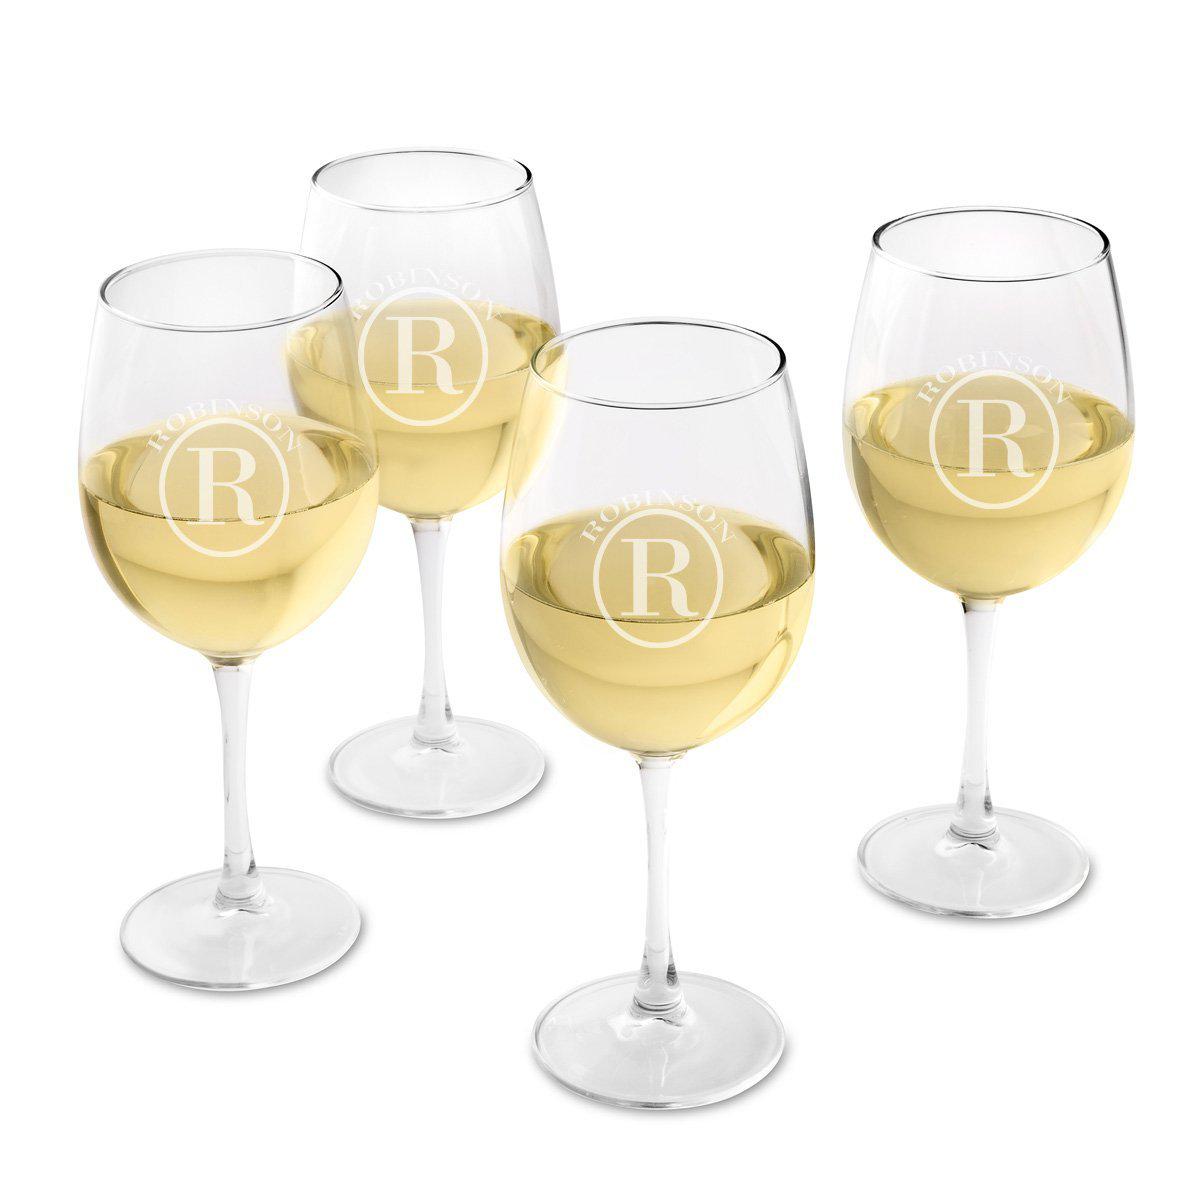 Personalized White Wine Glasses Set of 4 - All